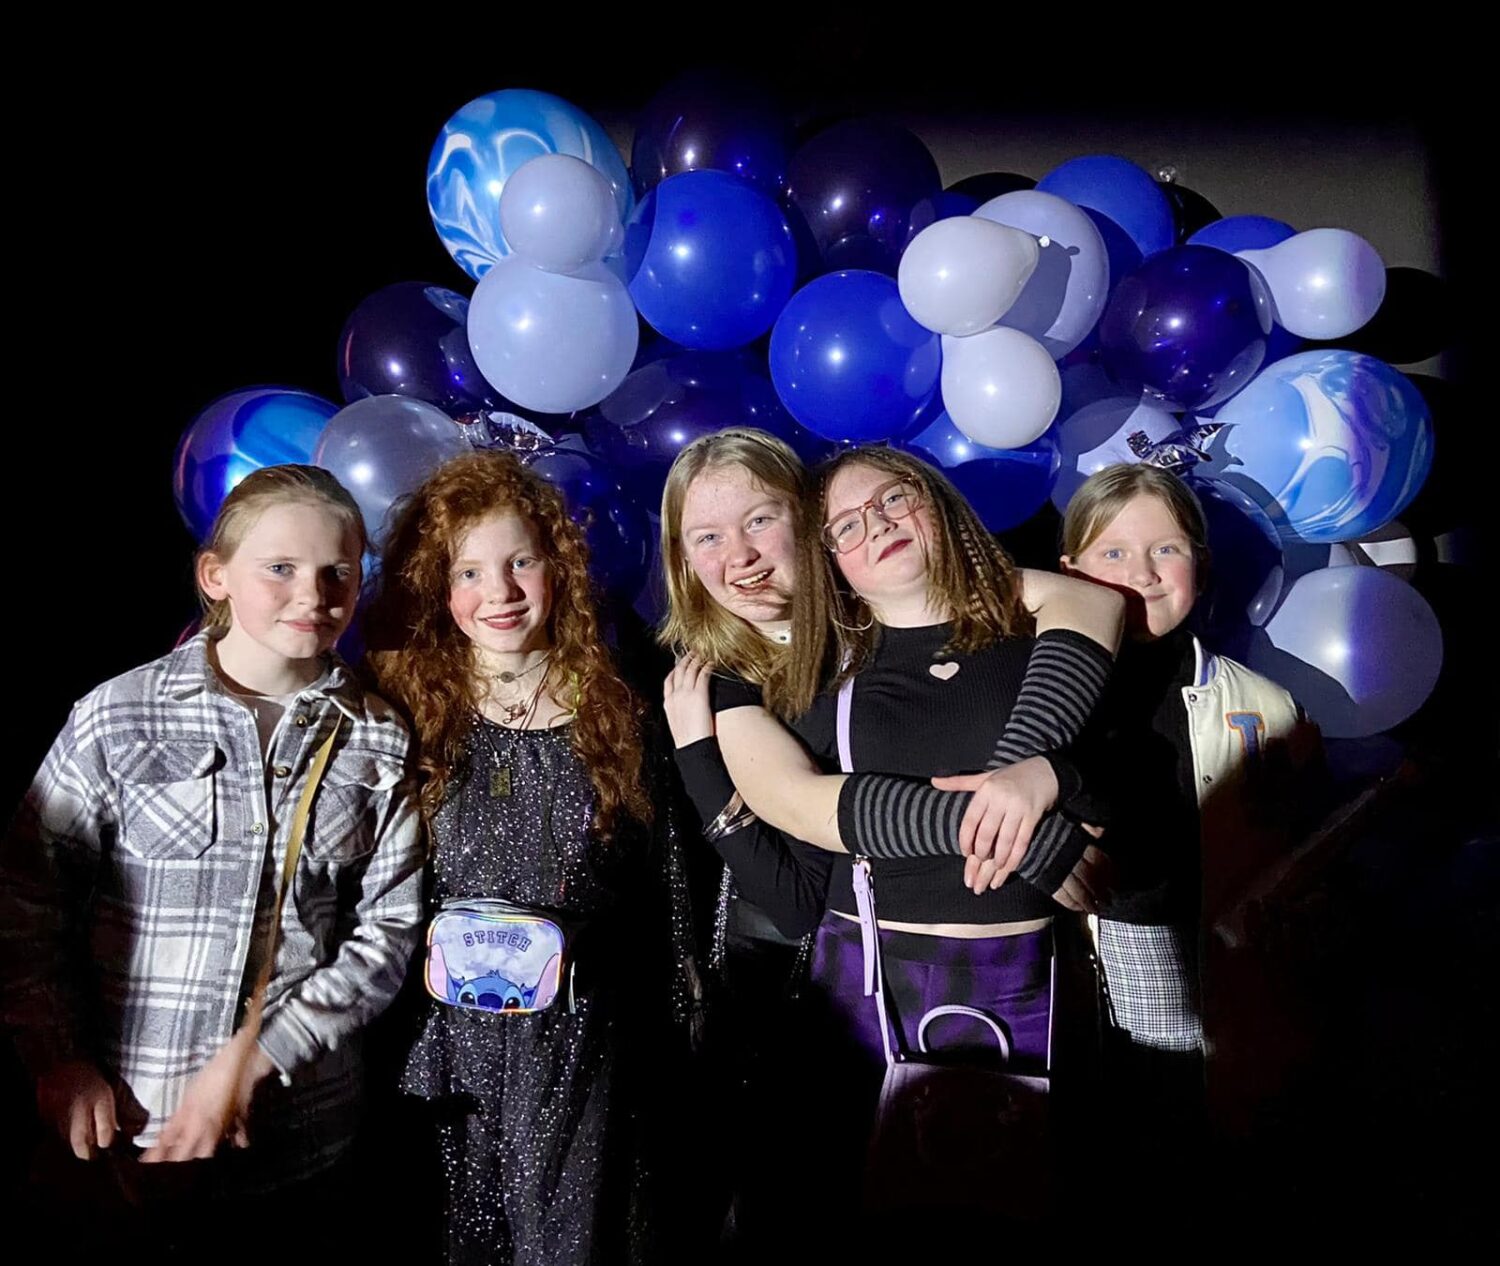 5 girls smiling for the camera with ballons behind them.